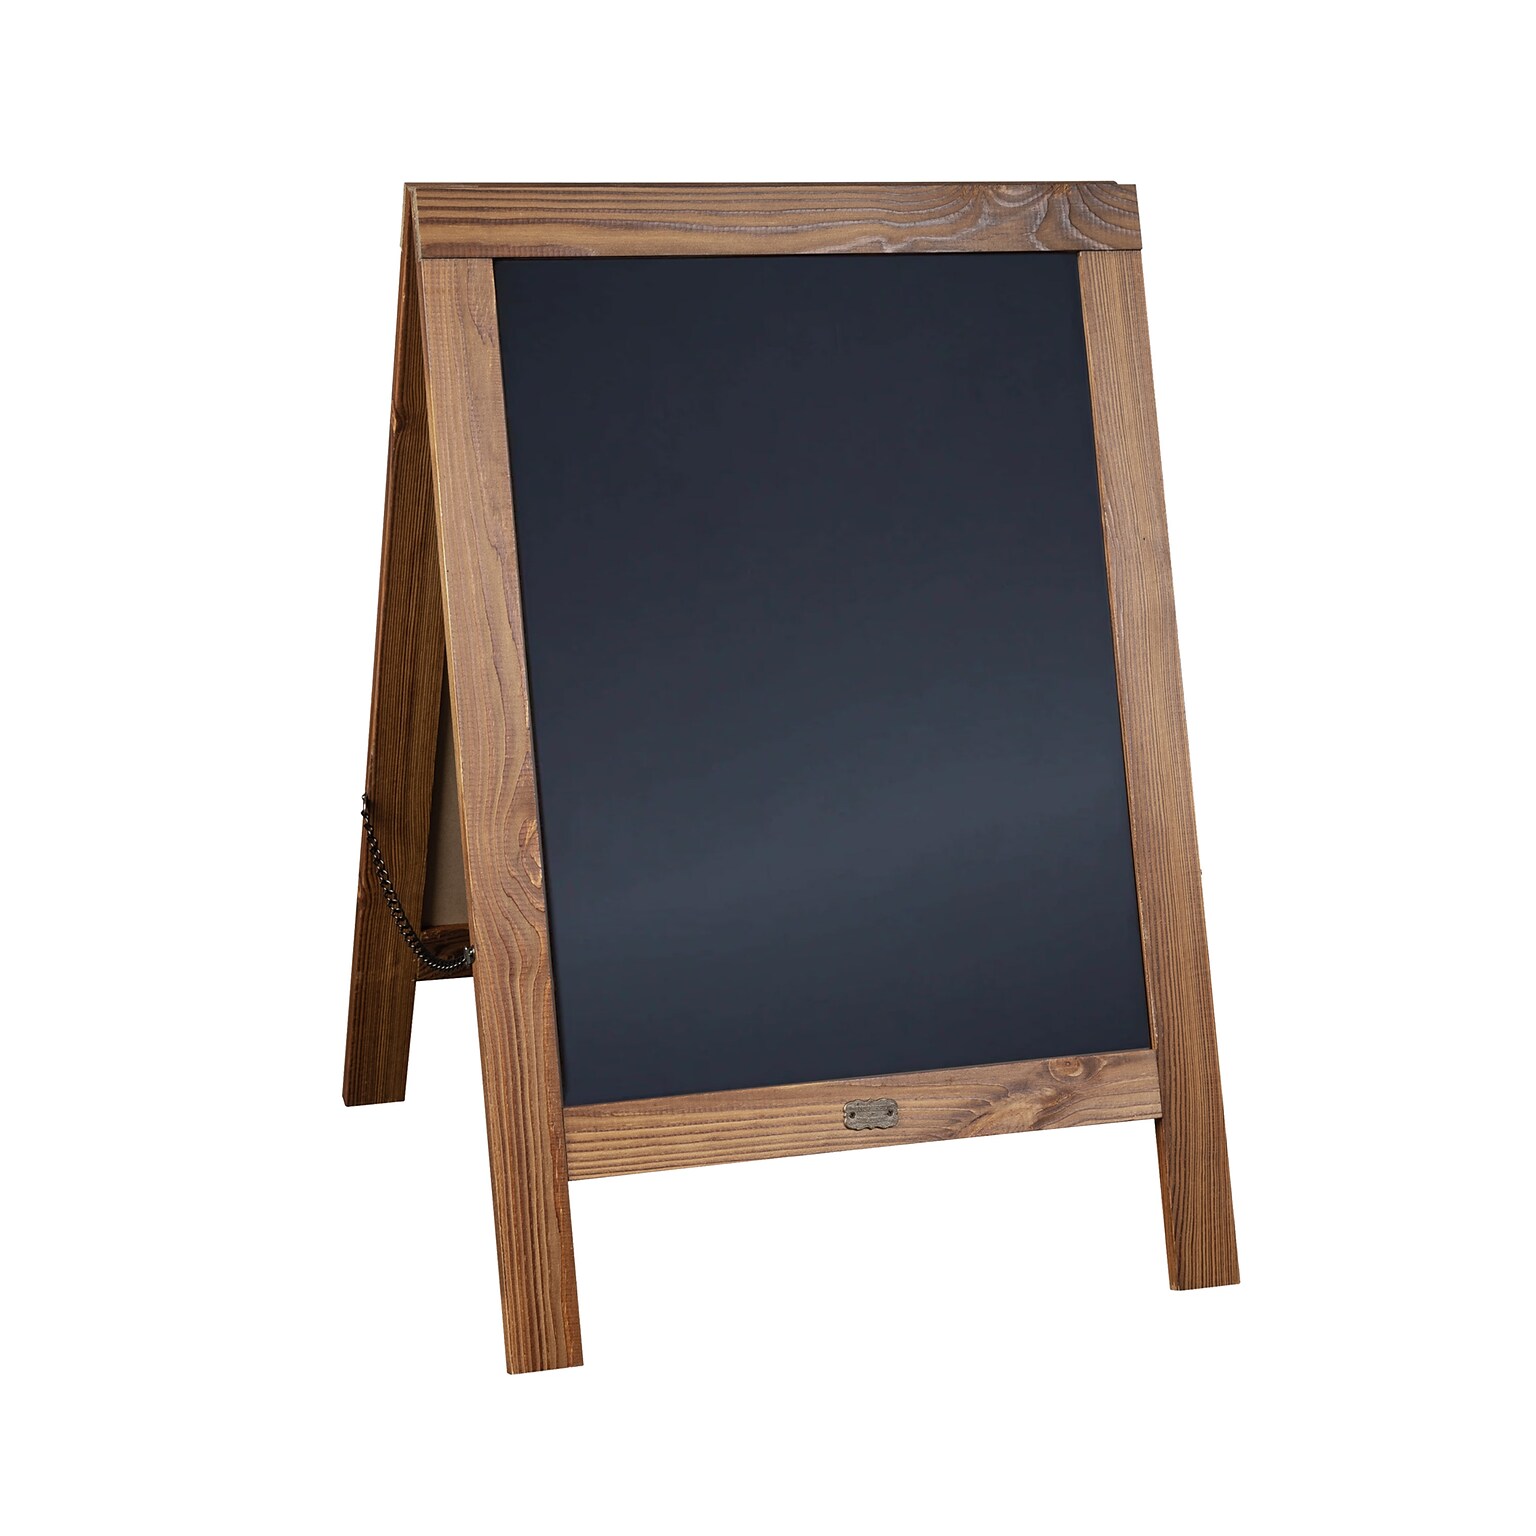 Flash Furniture Canterbury Indoor/Outdoor Chalkboard Sign, Torched Brown, 30H x 20W (HGWACB3020TORCH)